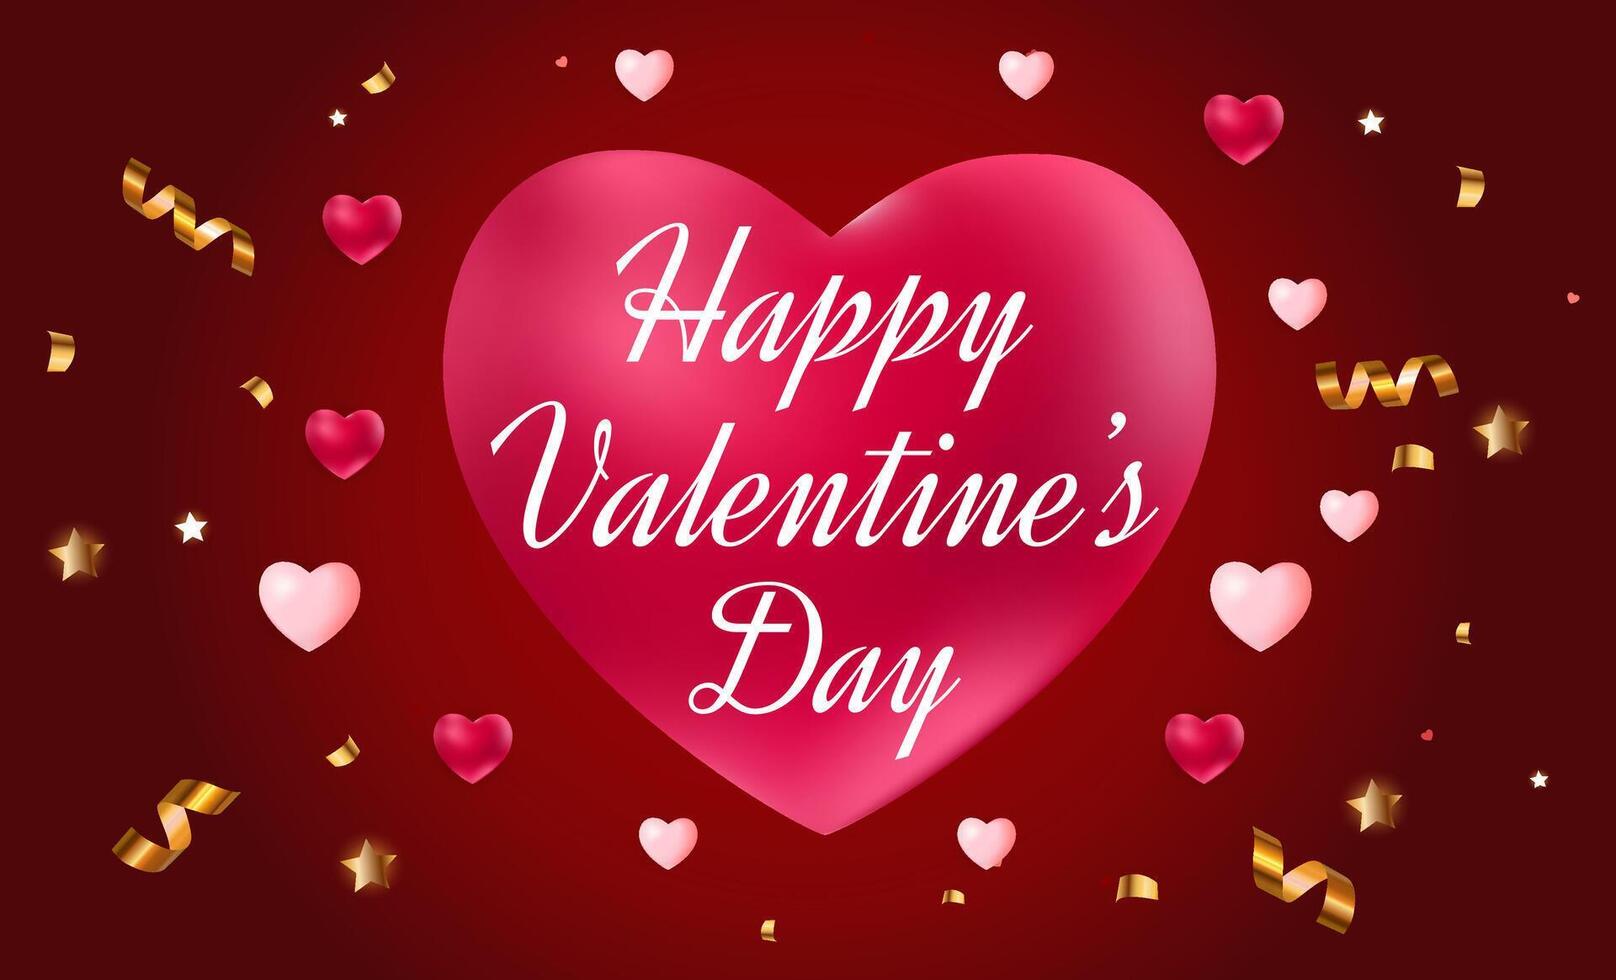 Happy Valentine's Day Poster or banner with cute font,sweet hearts and gift card on red background. Greetings valentines day from special person. Illustration vector template valentines day concept.